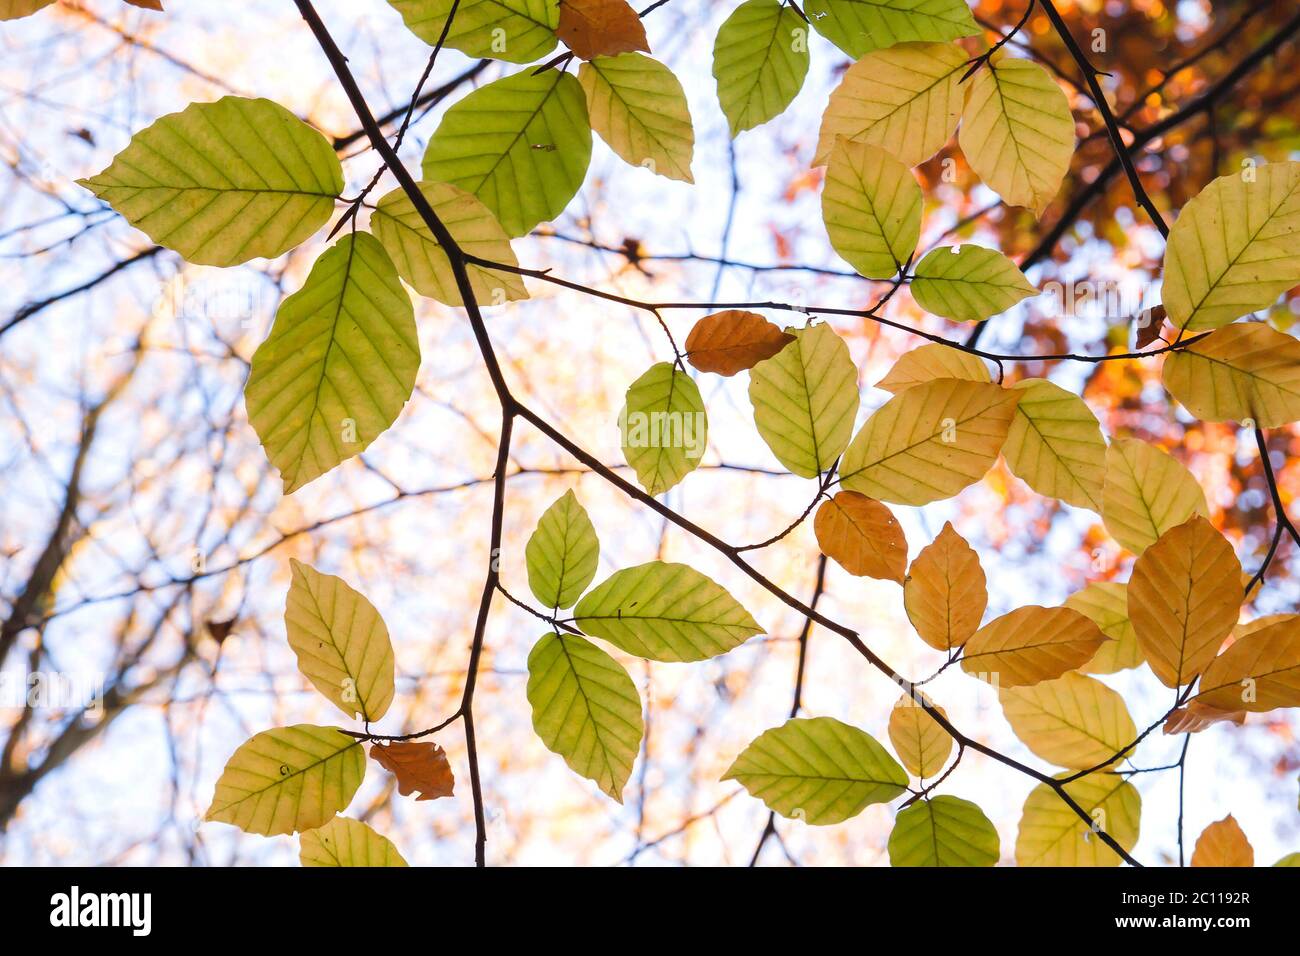 Detail of fagus sylvatica or beech tree autumnal colored deciduous foliage Stock Photo